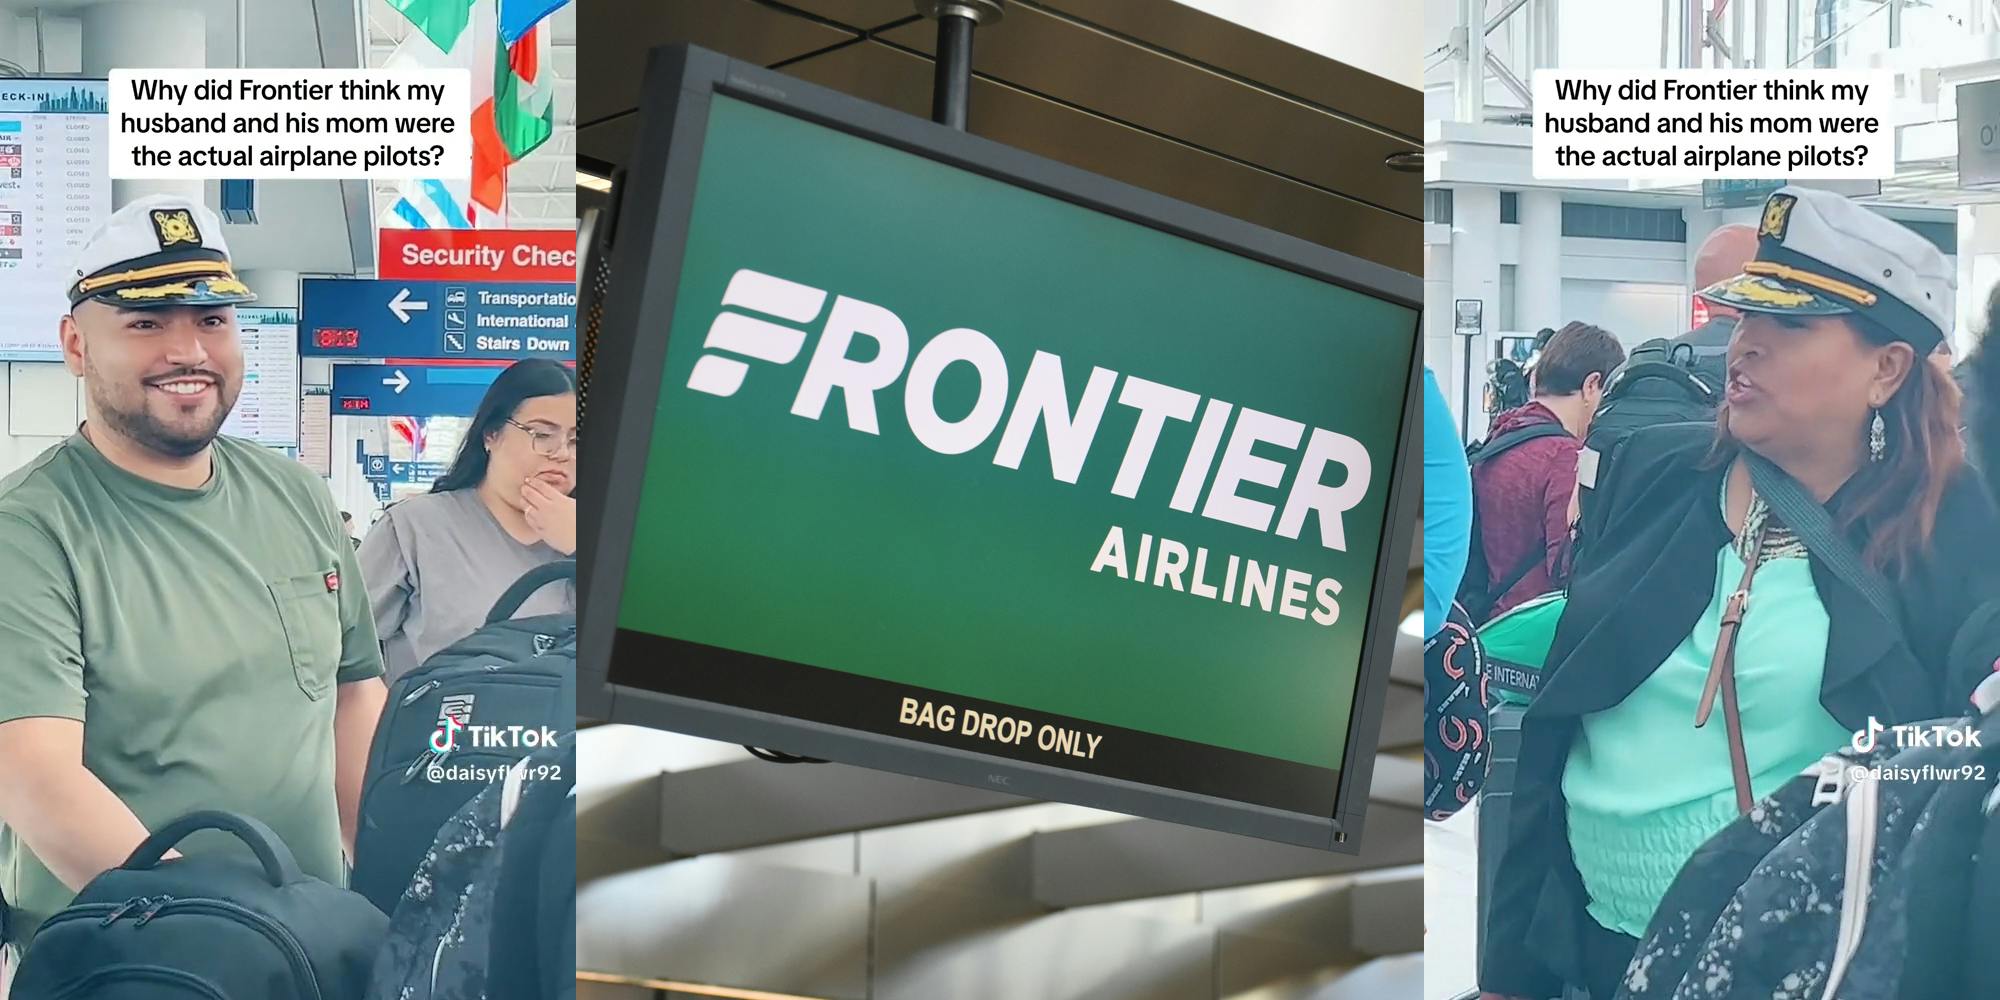 People in airport wearing pilots hats with caption "Why did Frontier think my husband and his mom were the actual airplane pilots?" (l&r) Frontier Airlines logo on monitor (c)